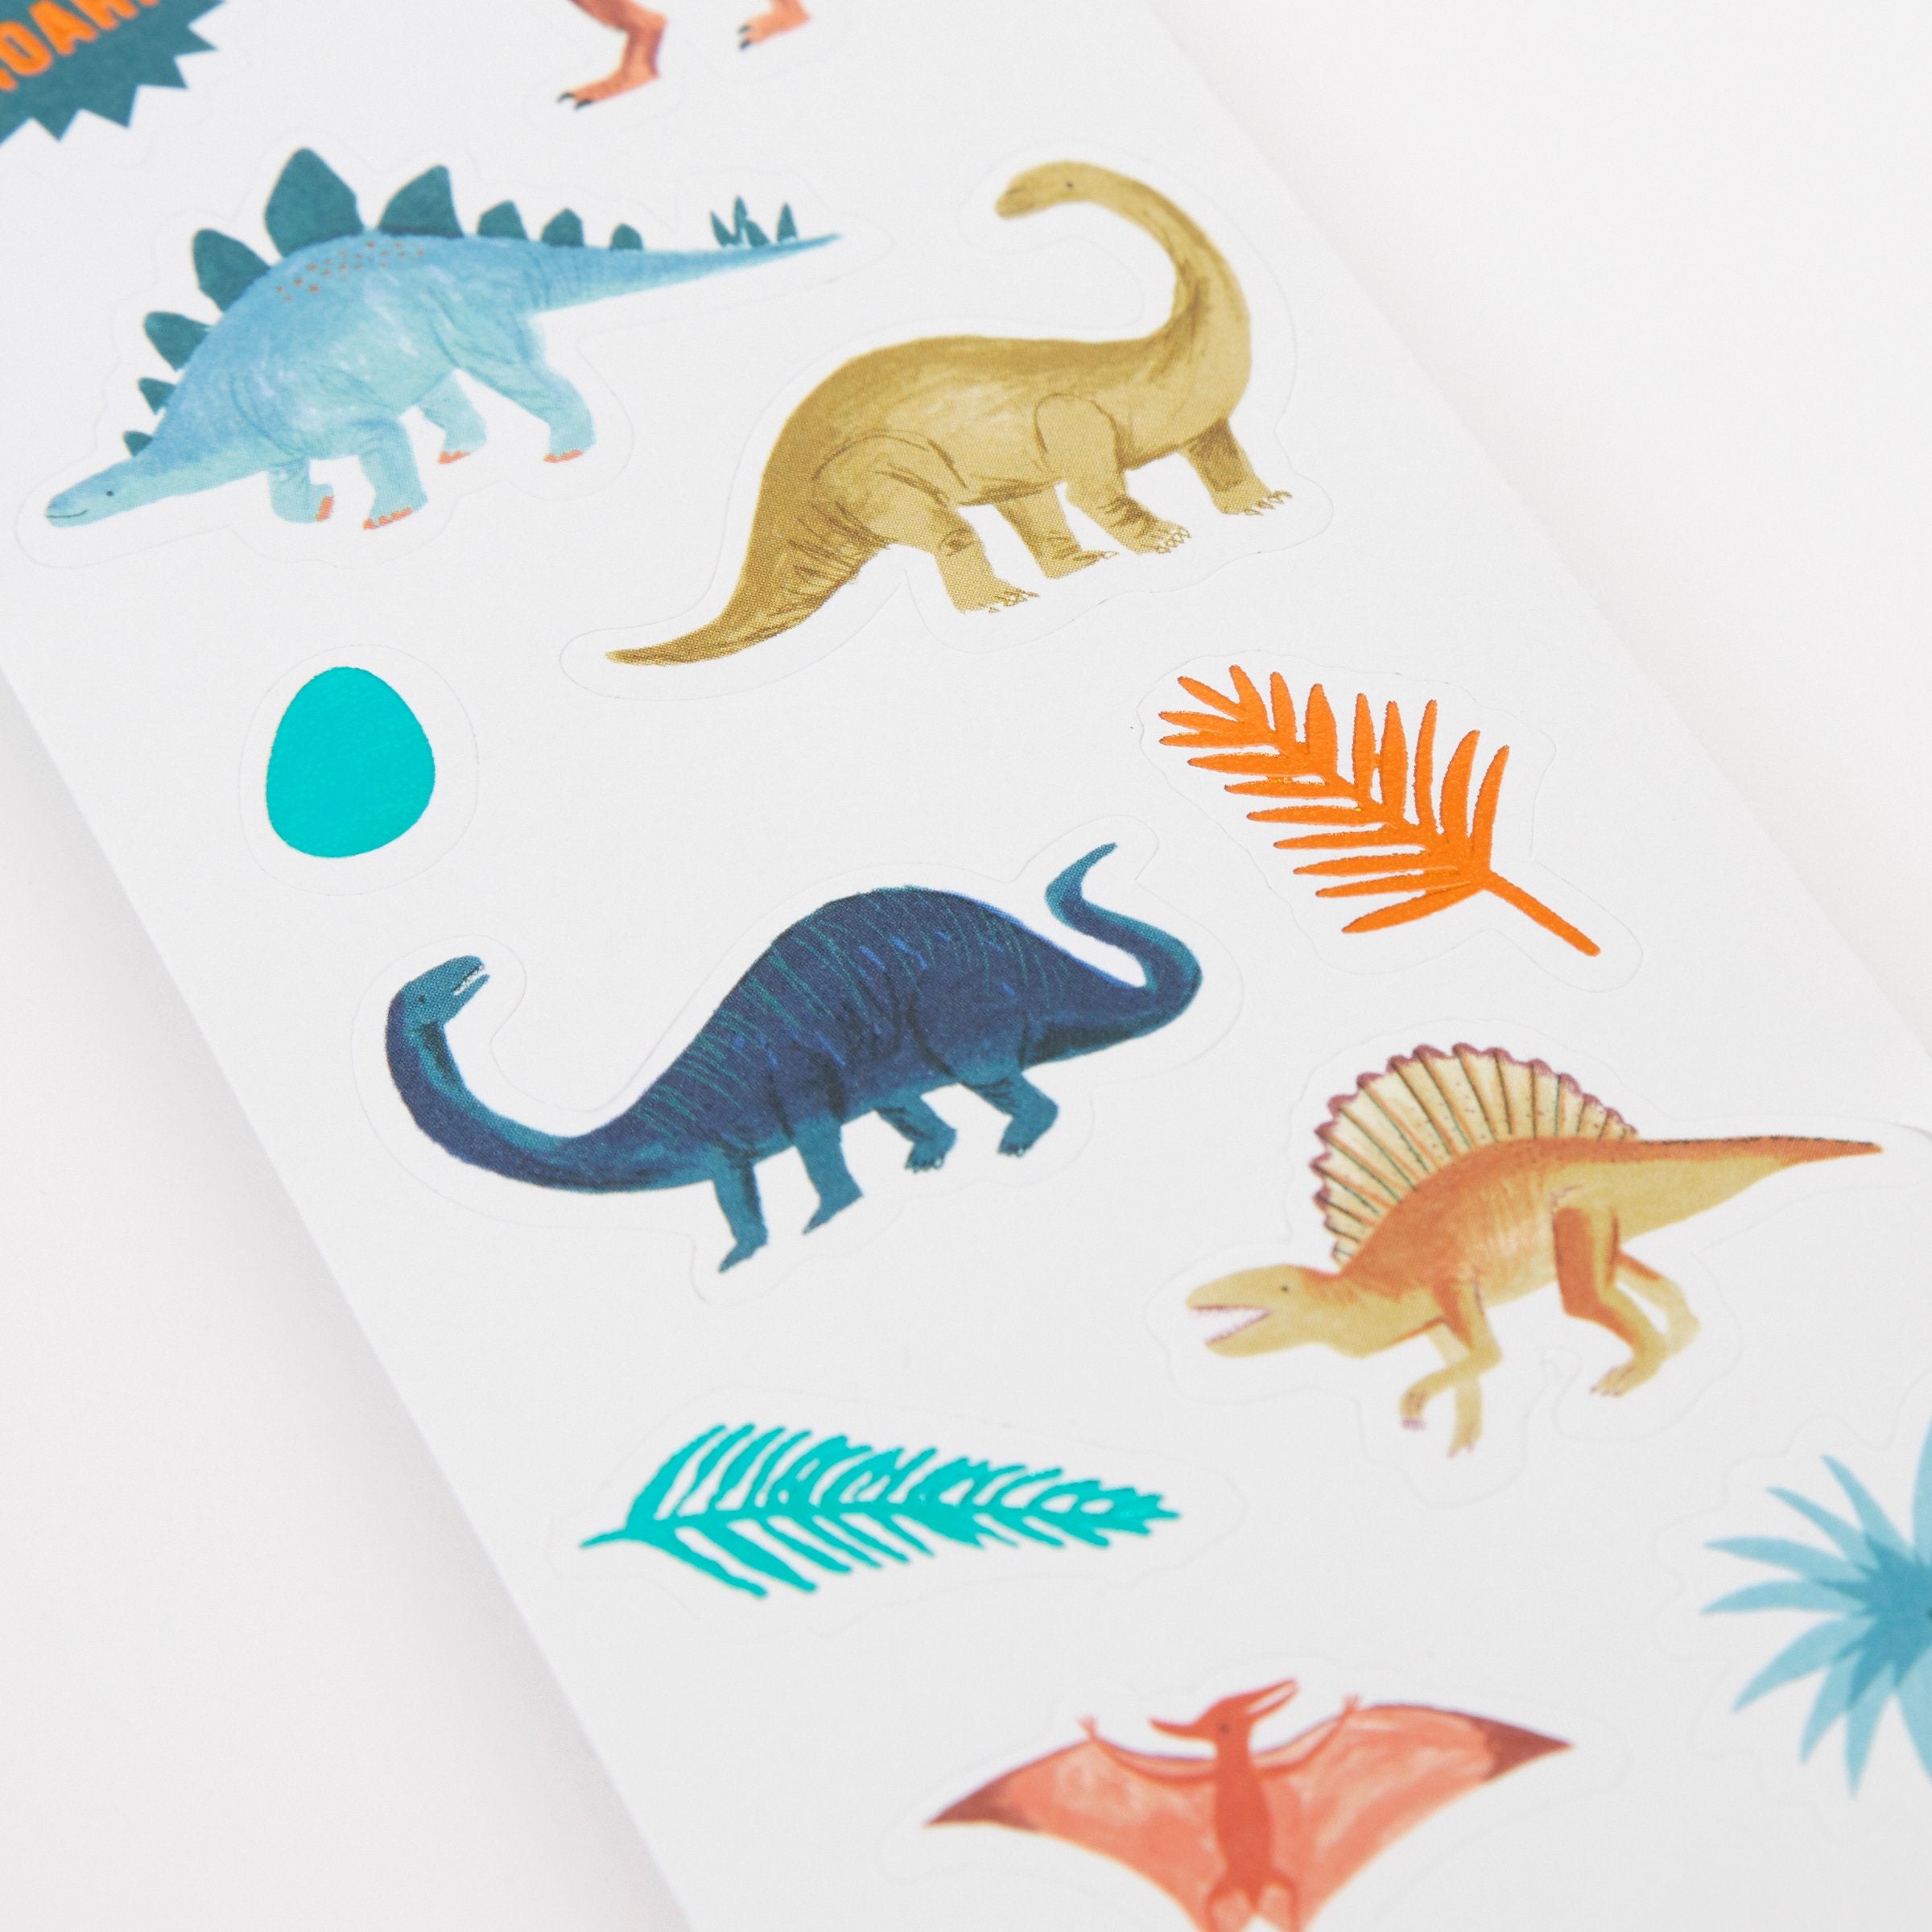  Dinosaur Stickers Party Dinosaur Decal Stickers Fun Bumber  Tractor Atickers for Moms Funny Memes Skateboard Car Sticker : Toys & Games